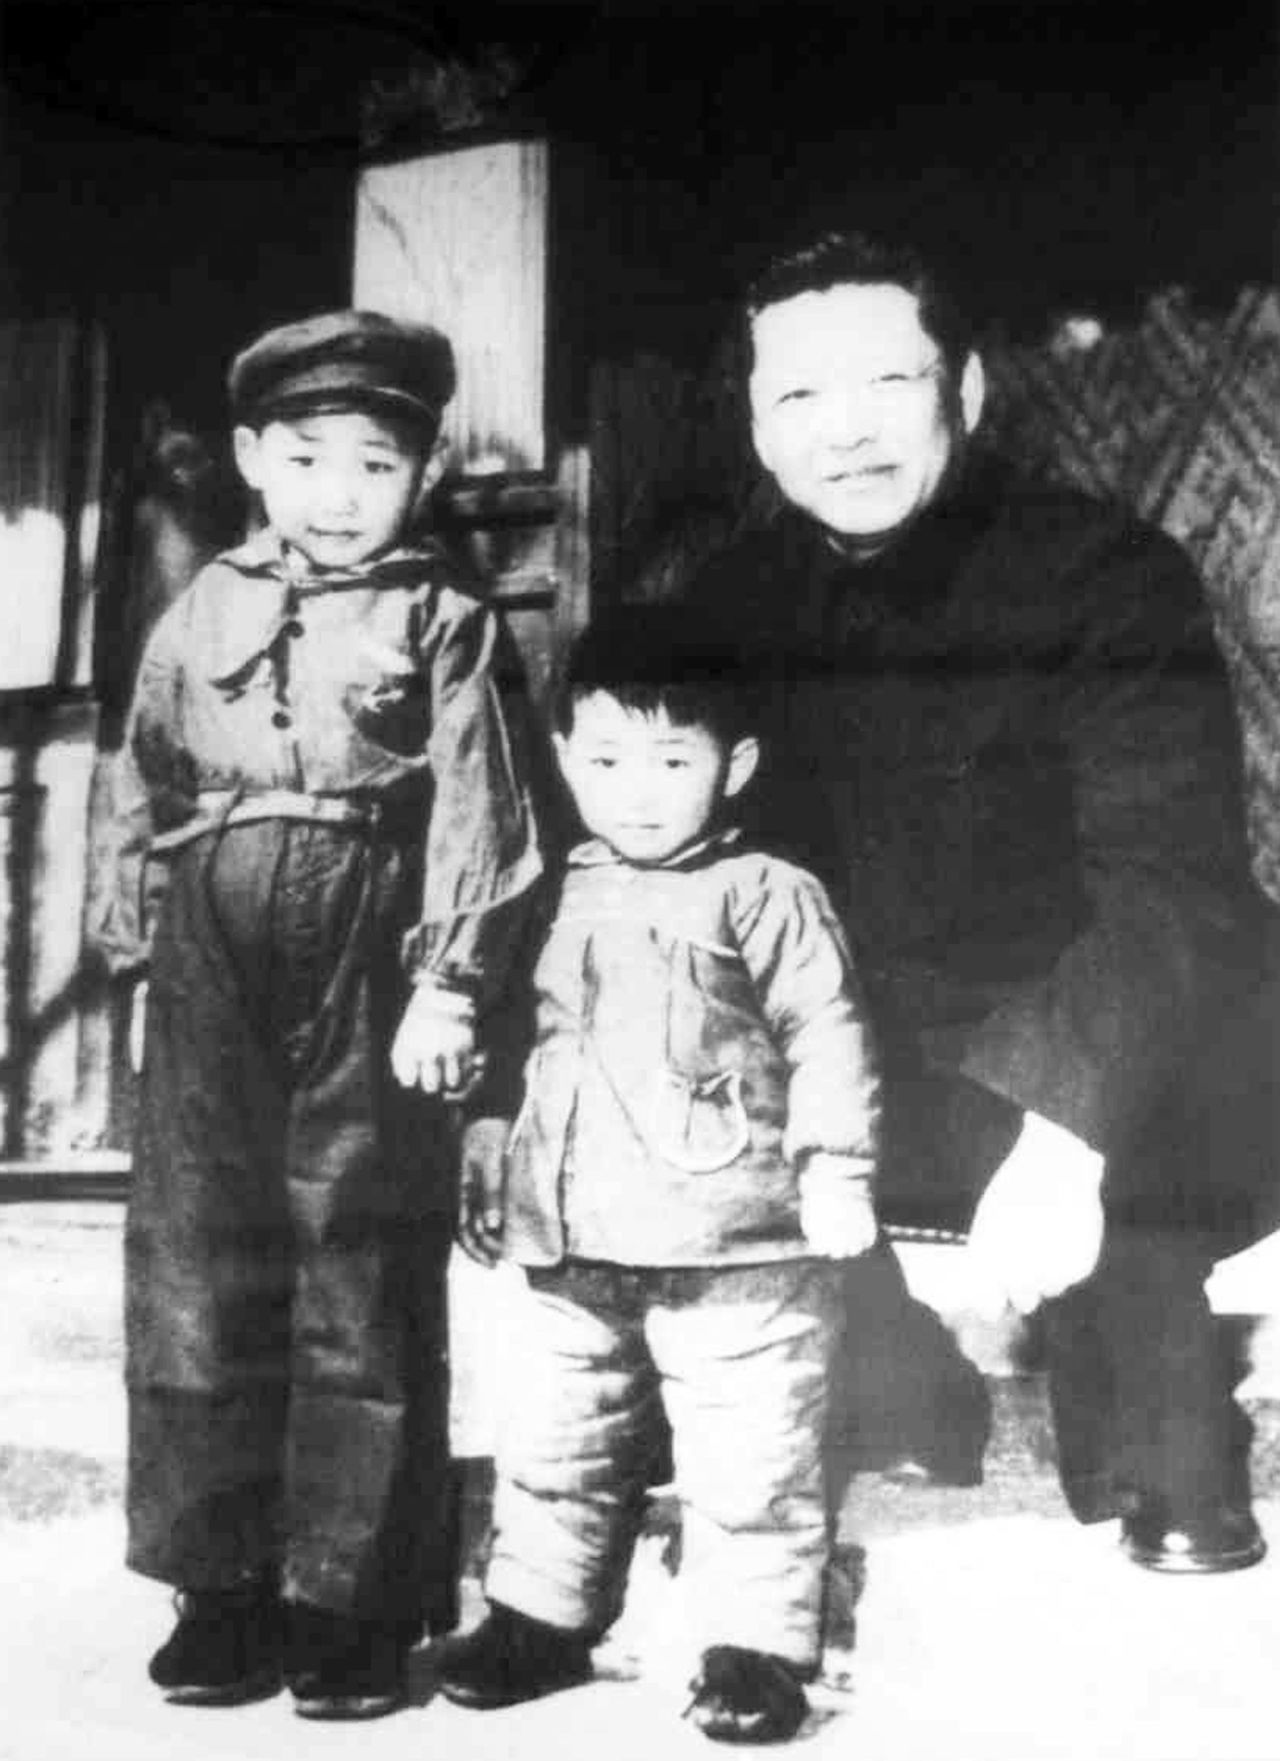 XI, left, stands with his father, Xi Zhongxun, and his younger brother, Xi Yuanping, in 1958. Xi Zhongxun was a communist revolutionary who held several positions in the National People's Congress.